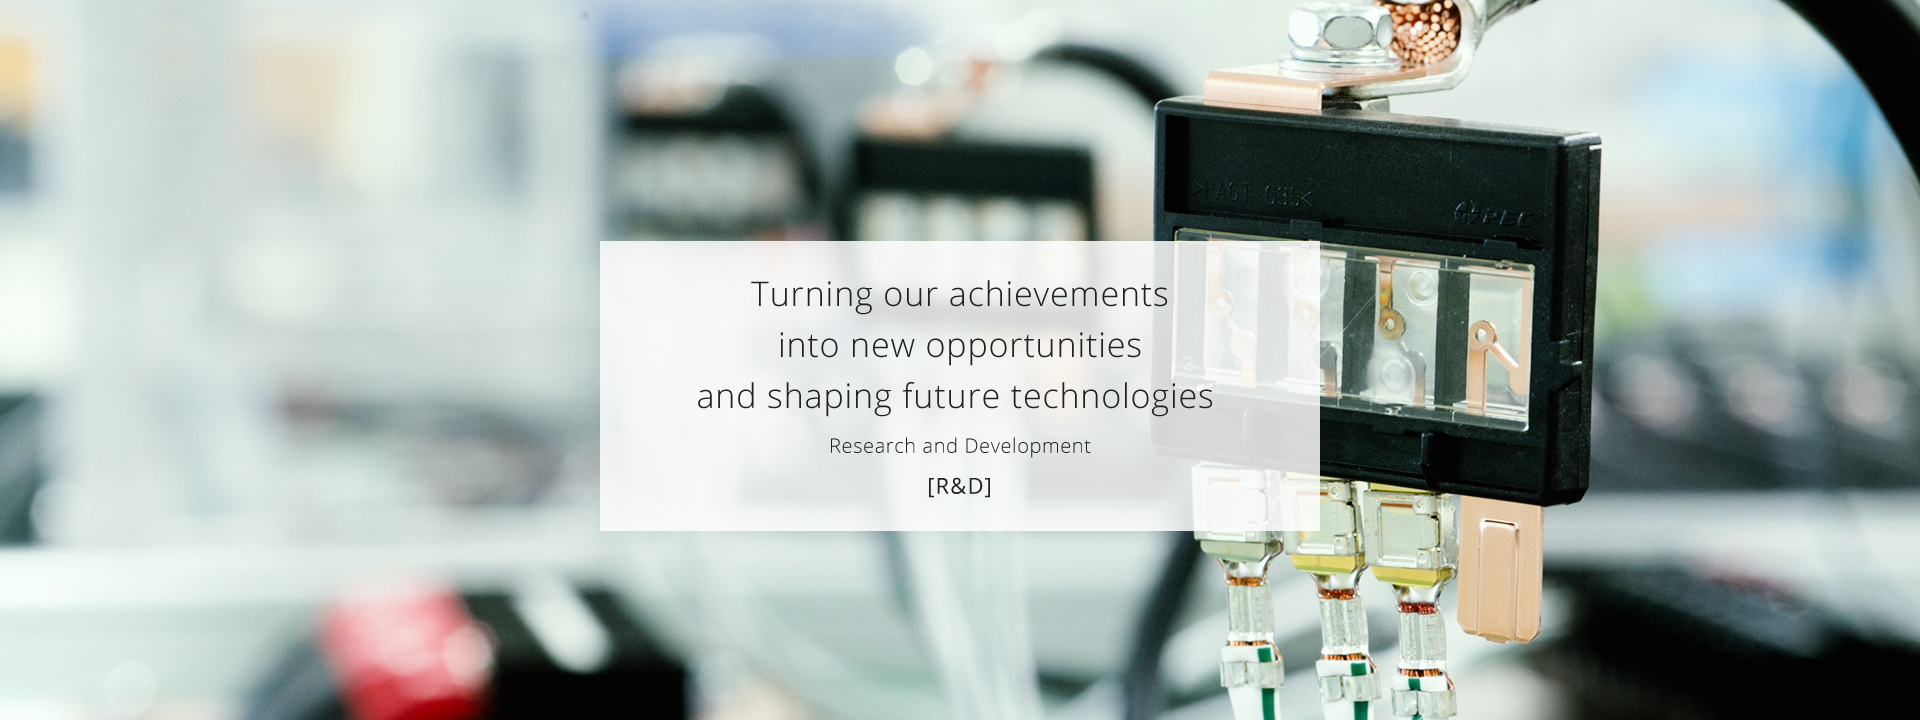 Turning our achievements into new opportunities and shaping future technologies [R&D]